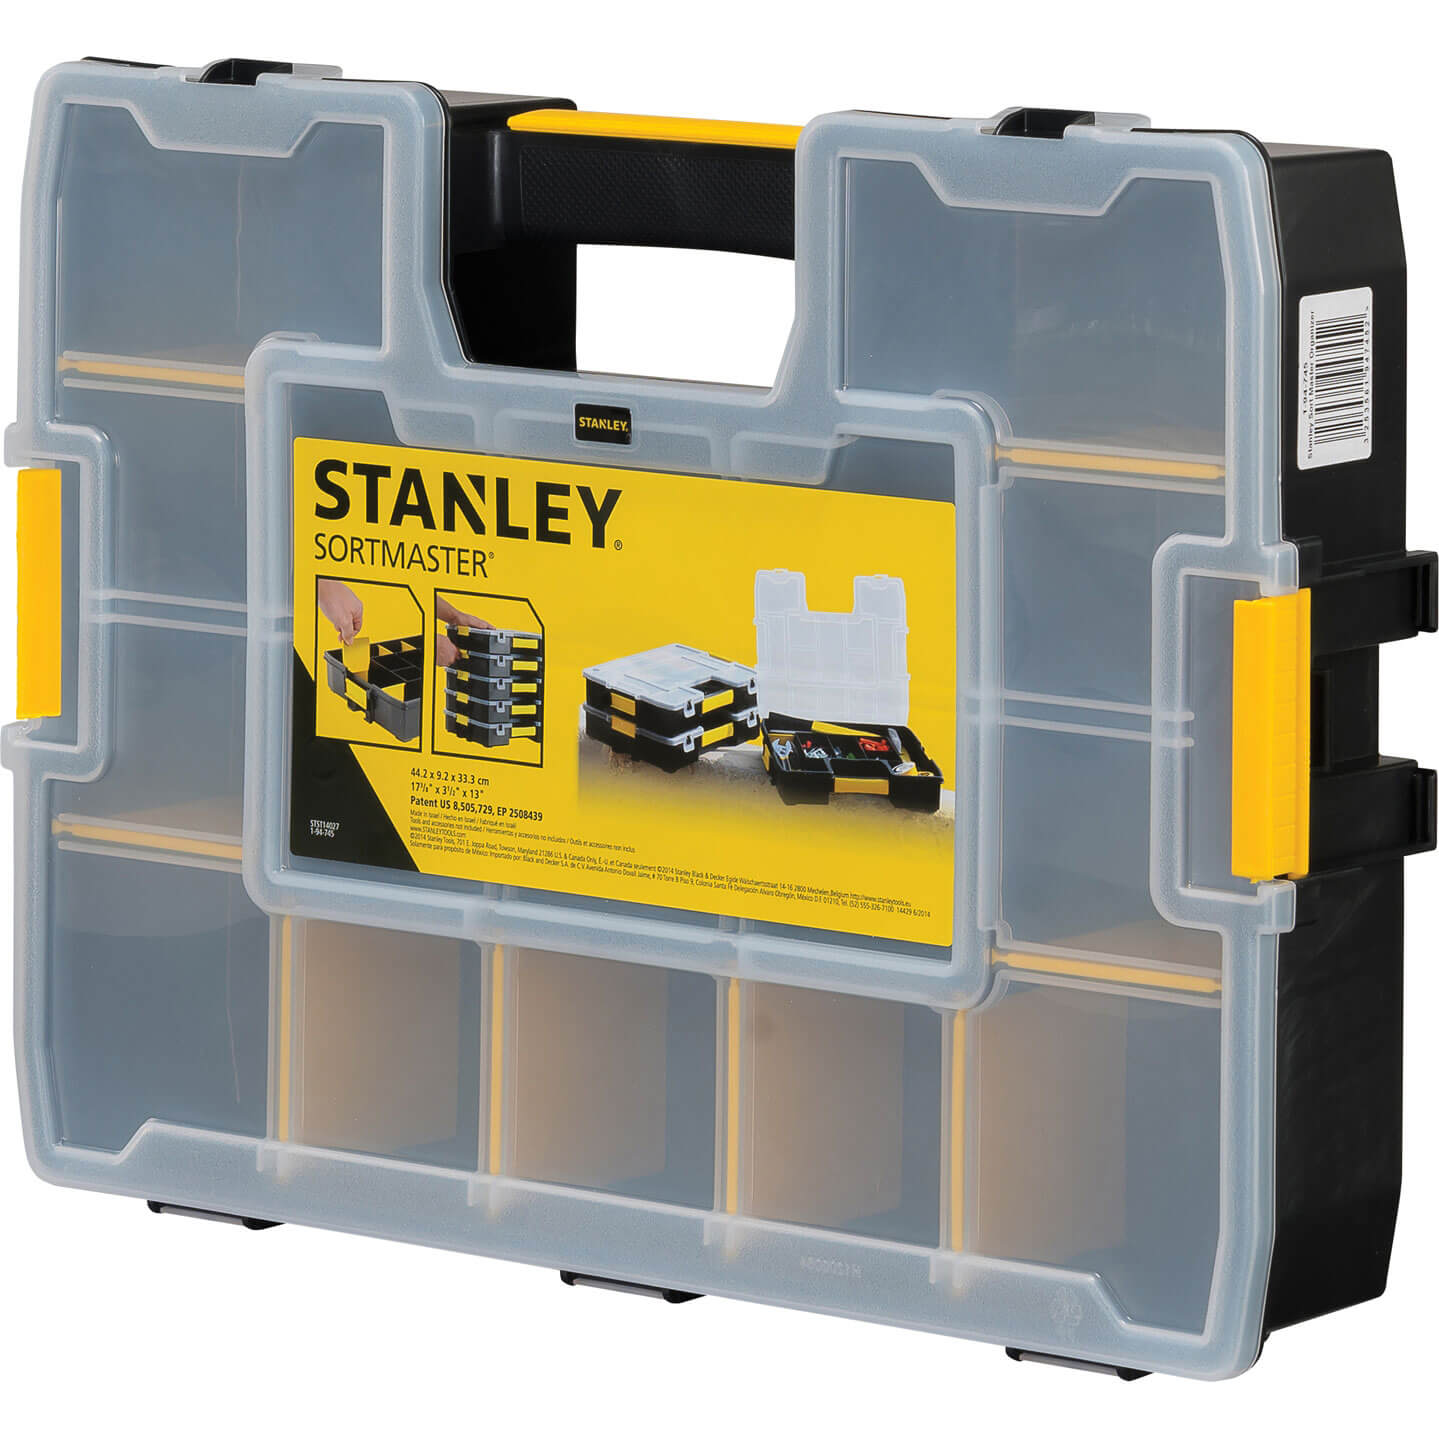 Image of Stanley Sortmaster Small Parts Organiser Box